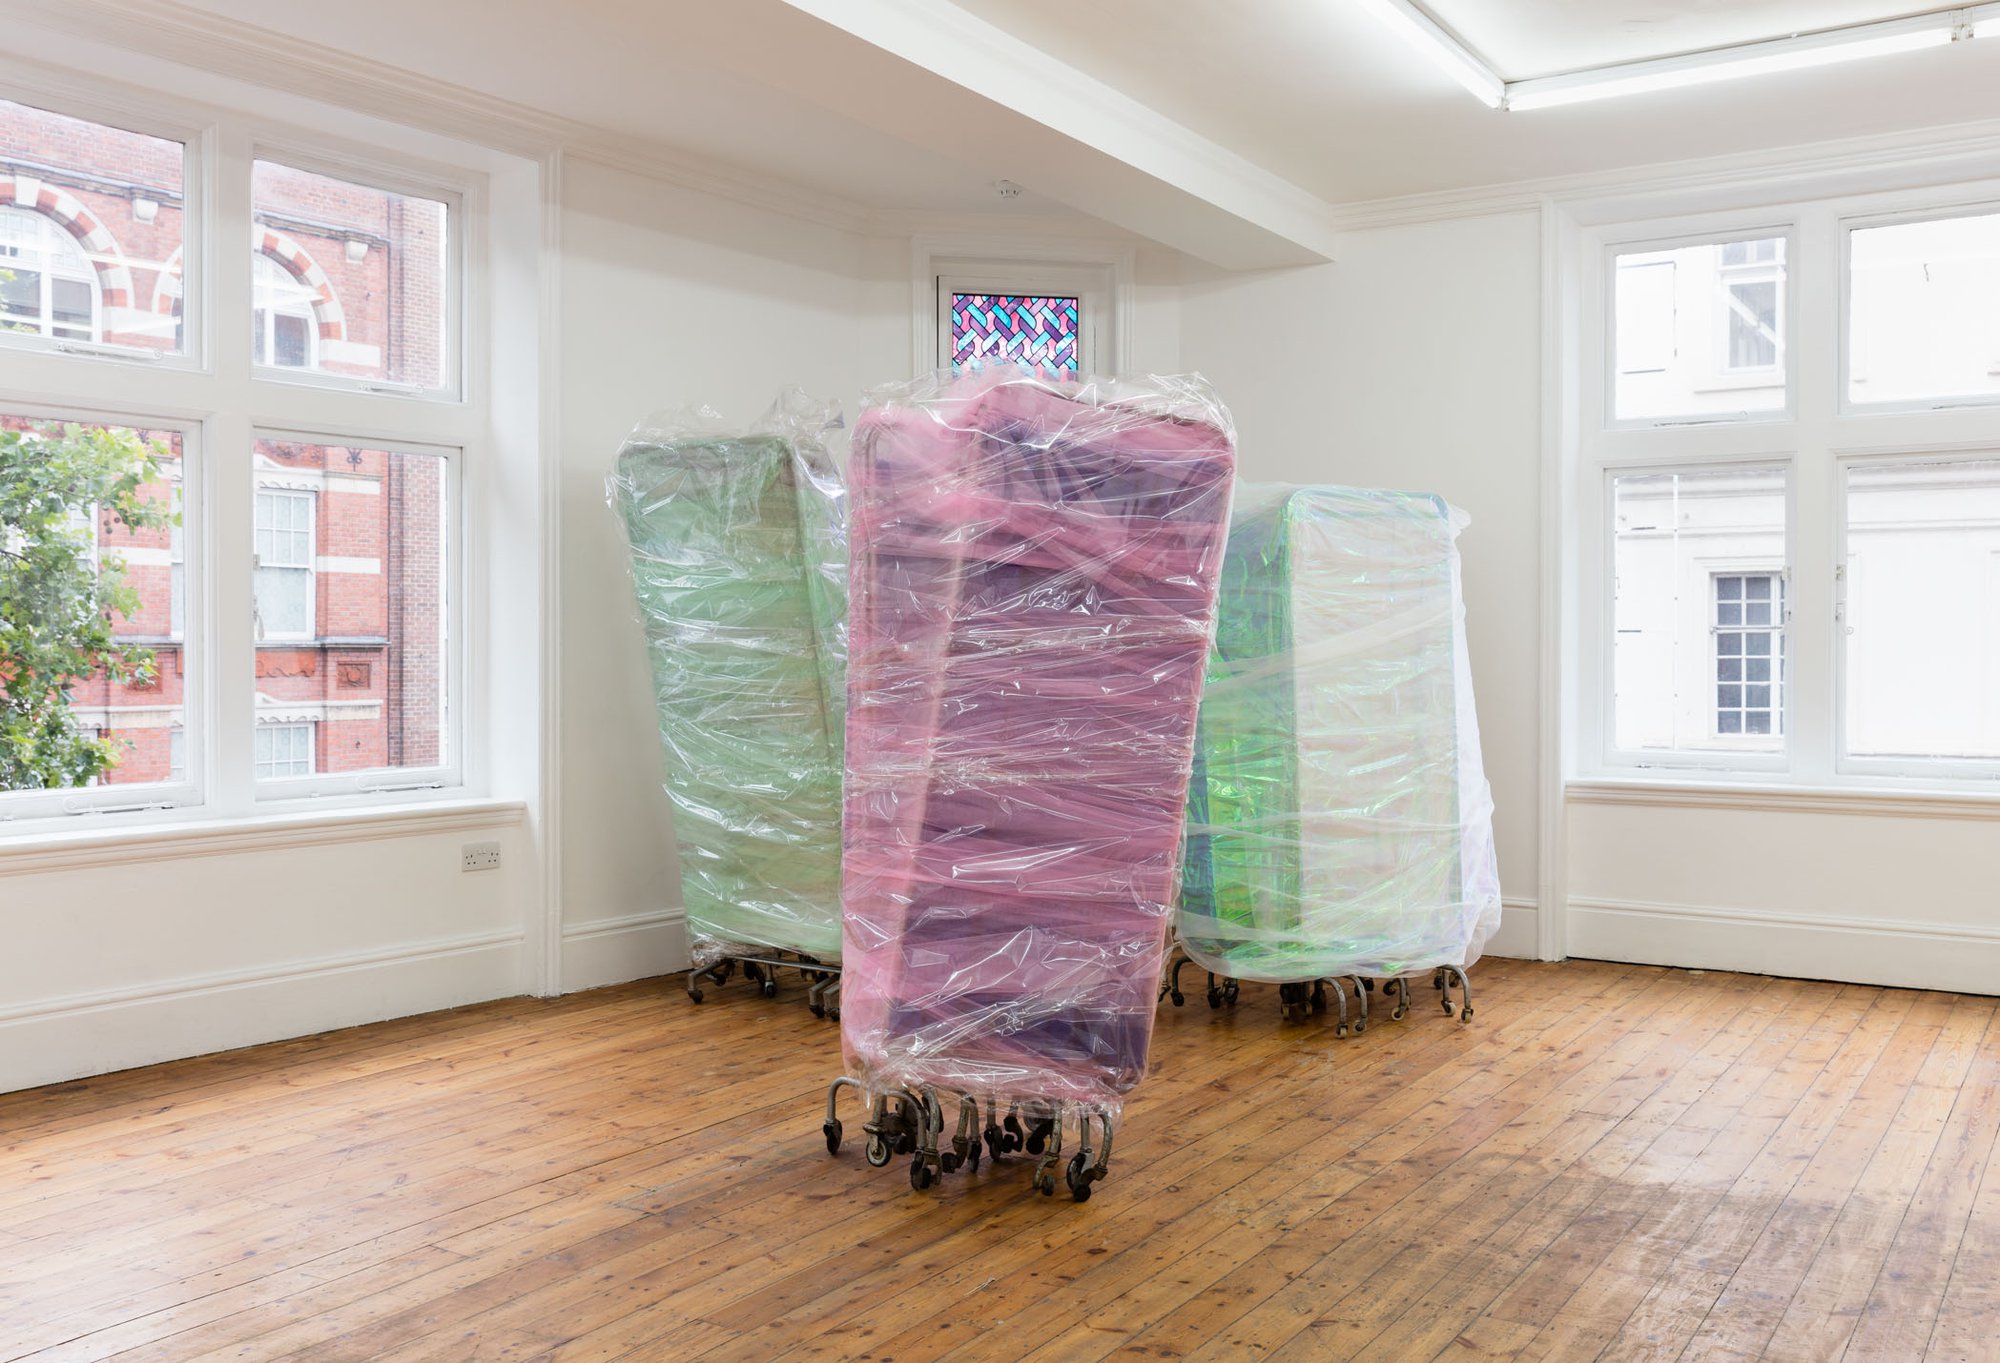 Ian Law, There was a body, I was there, was a body, medical privacy screens with soft toy fur fabric, curtain netting and organza, gift wrapped, 170 x 130 x 55 cm, 2016. Installation view, The Cypress Broke, Rodeo, London, 2016